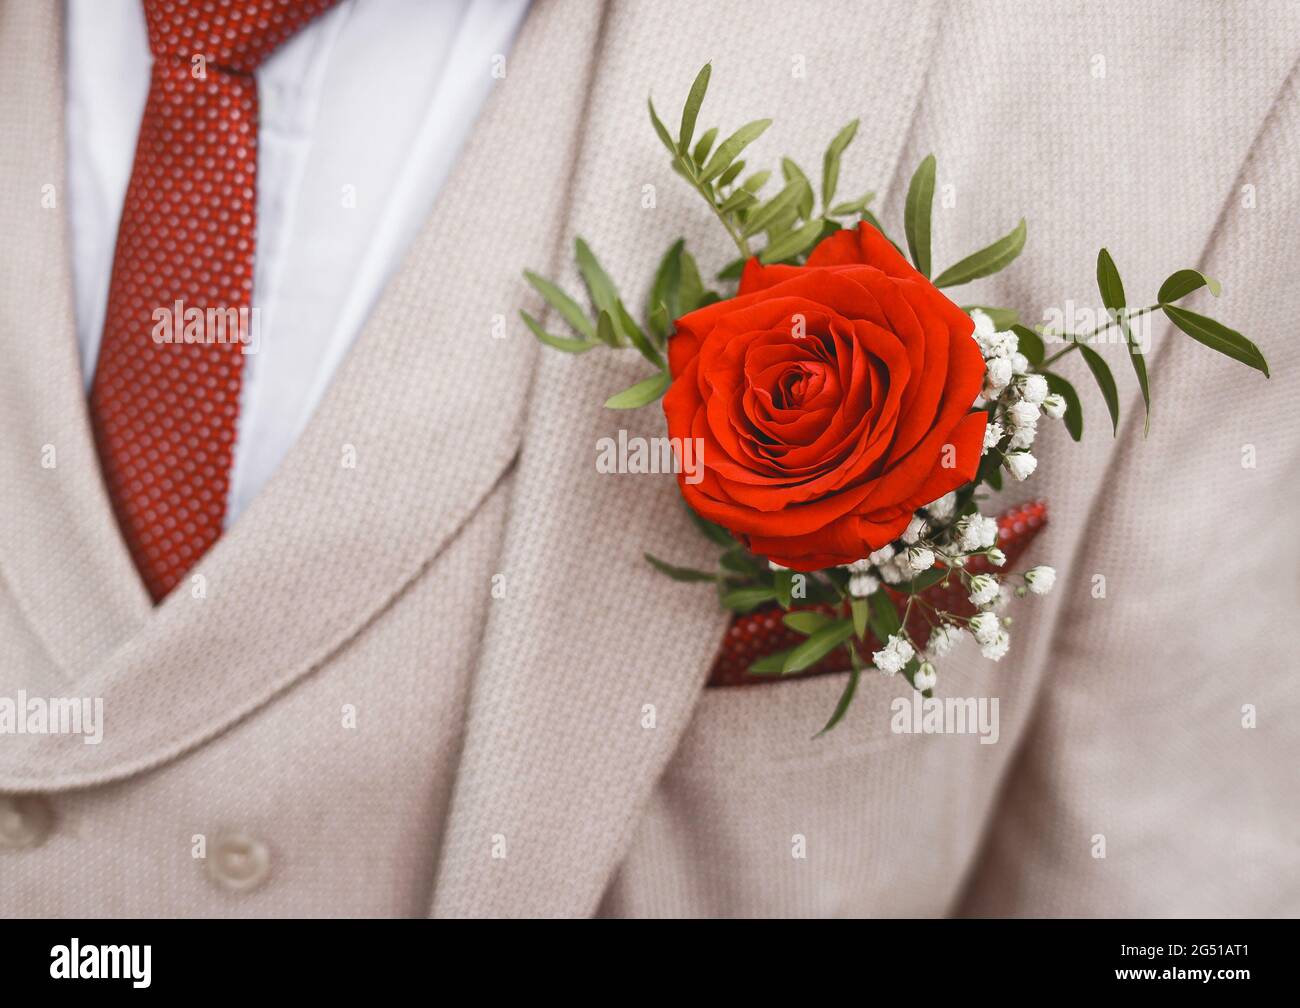 Men's beige wedding suit with a red polka dot tie, decorated with a rose, close-up. Stock Photo